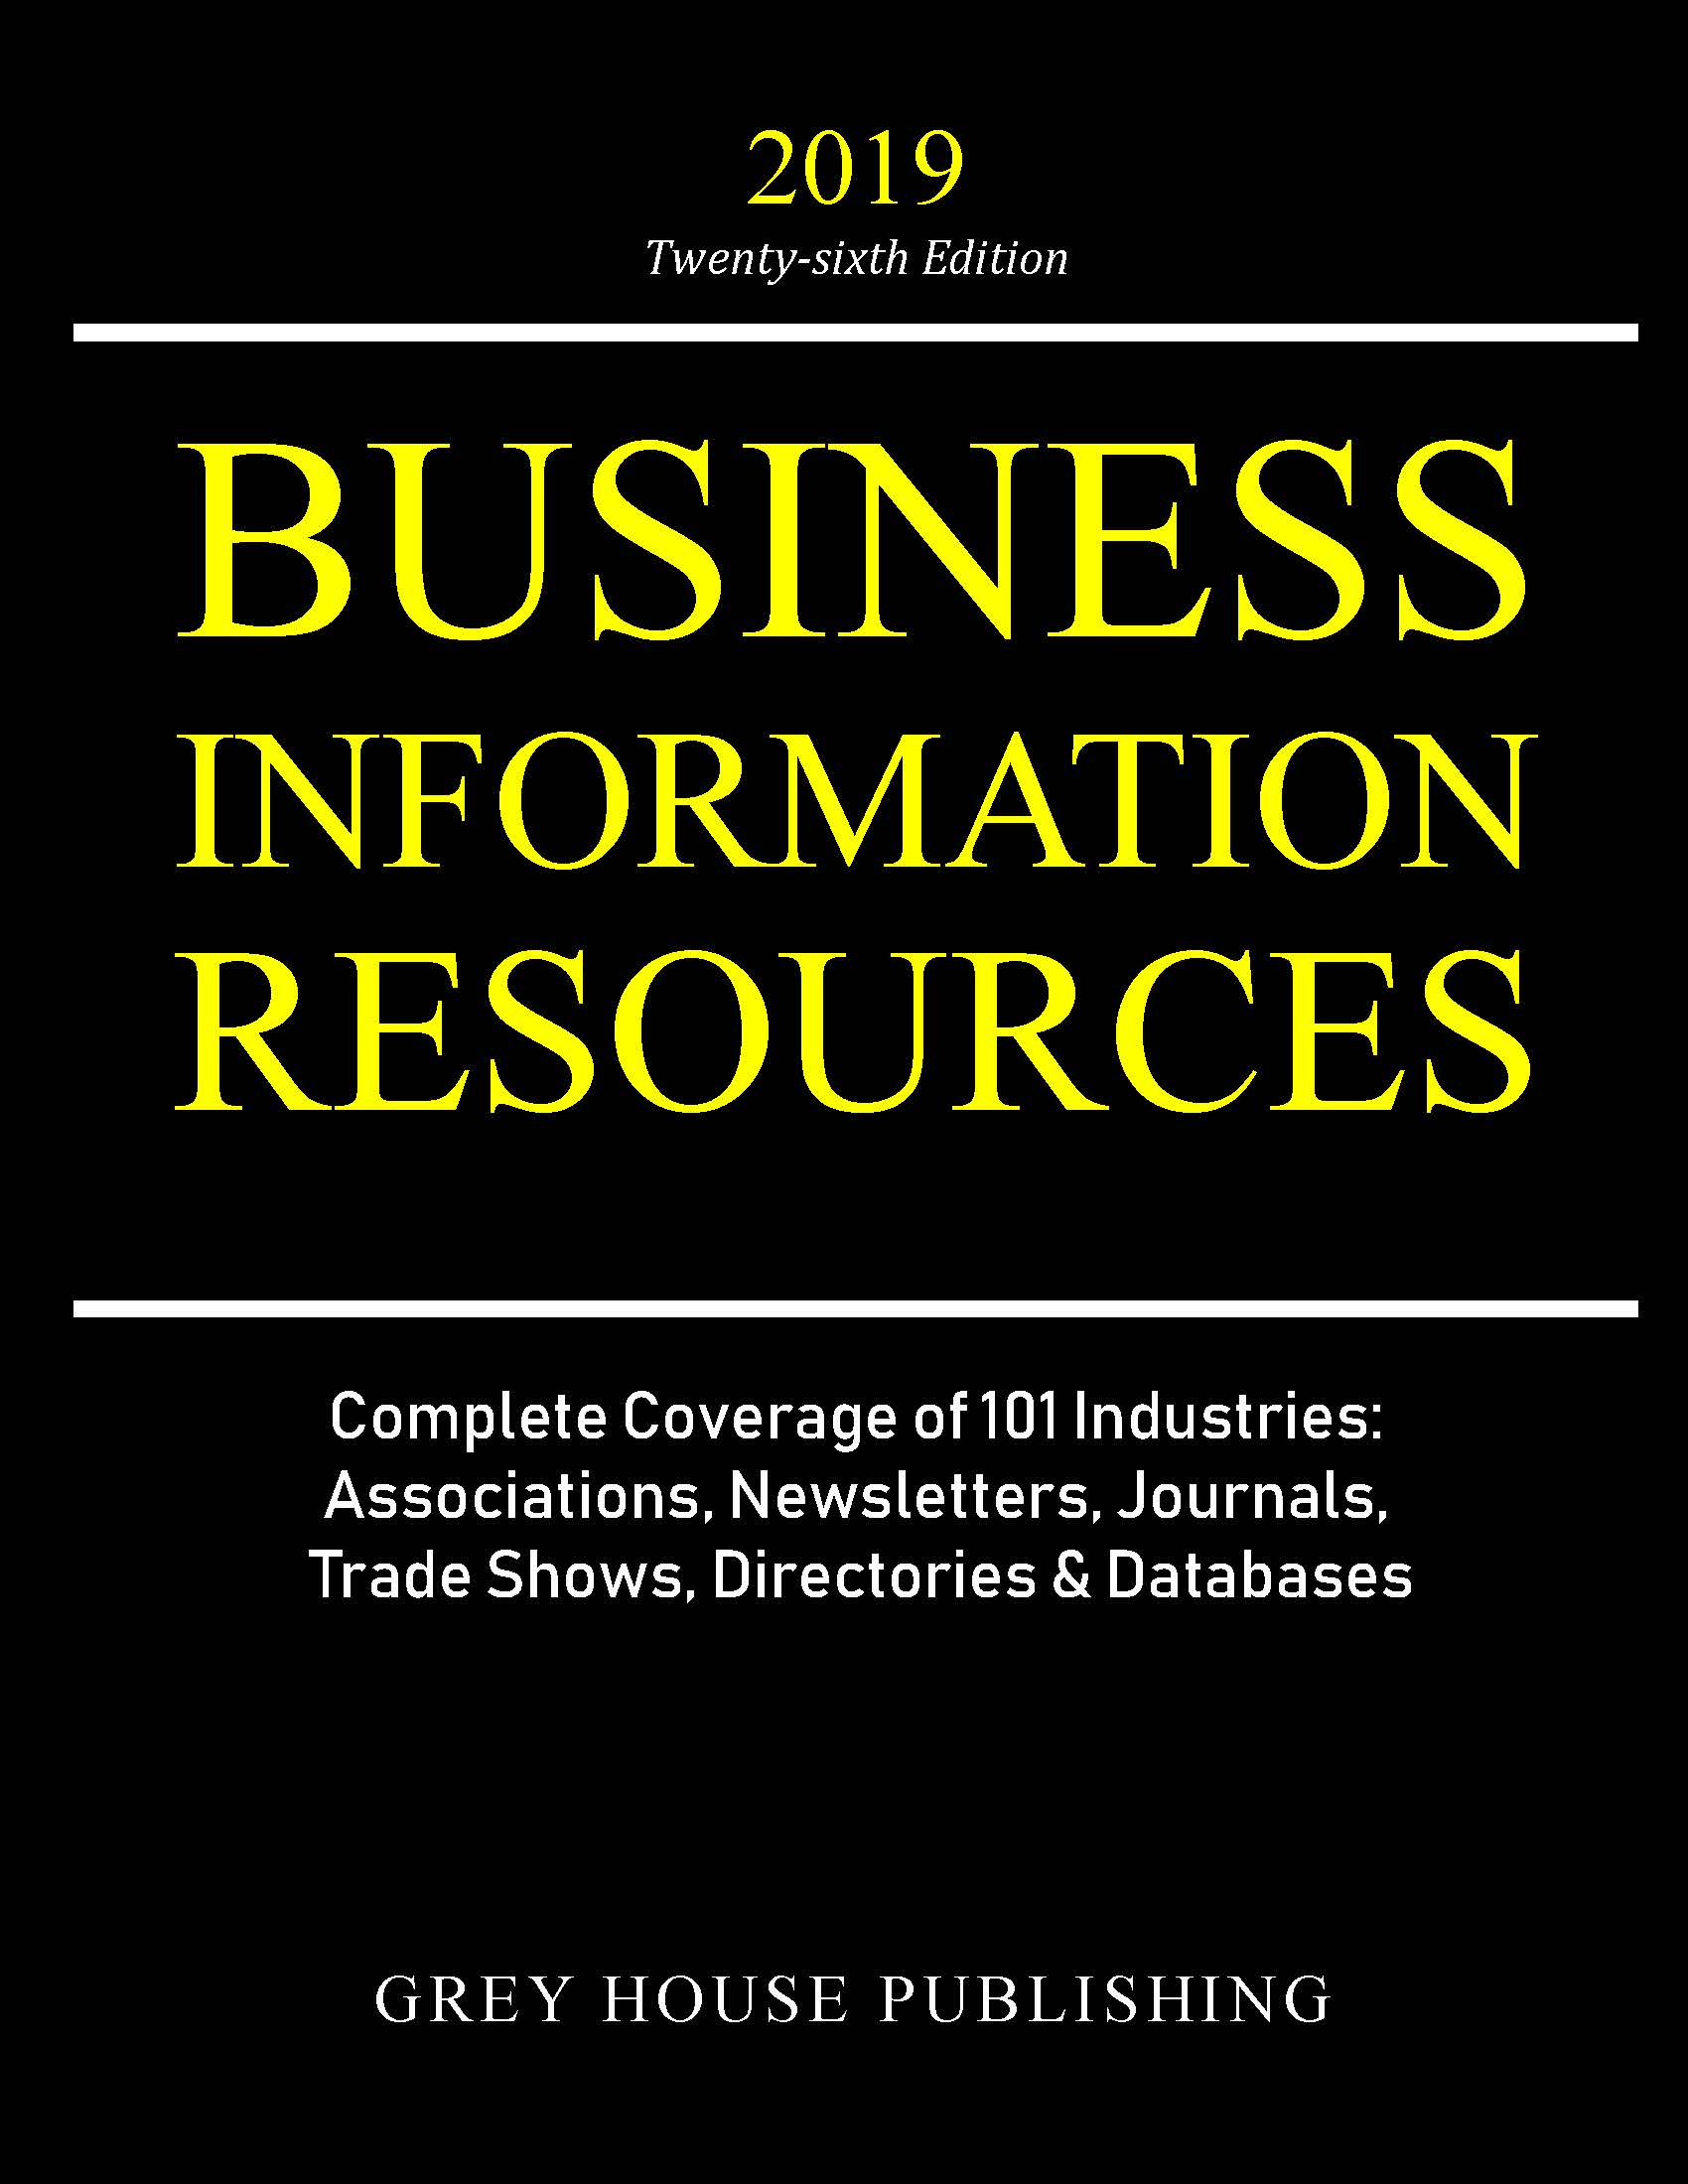 Business Information Resources